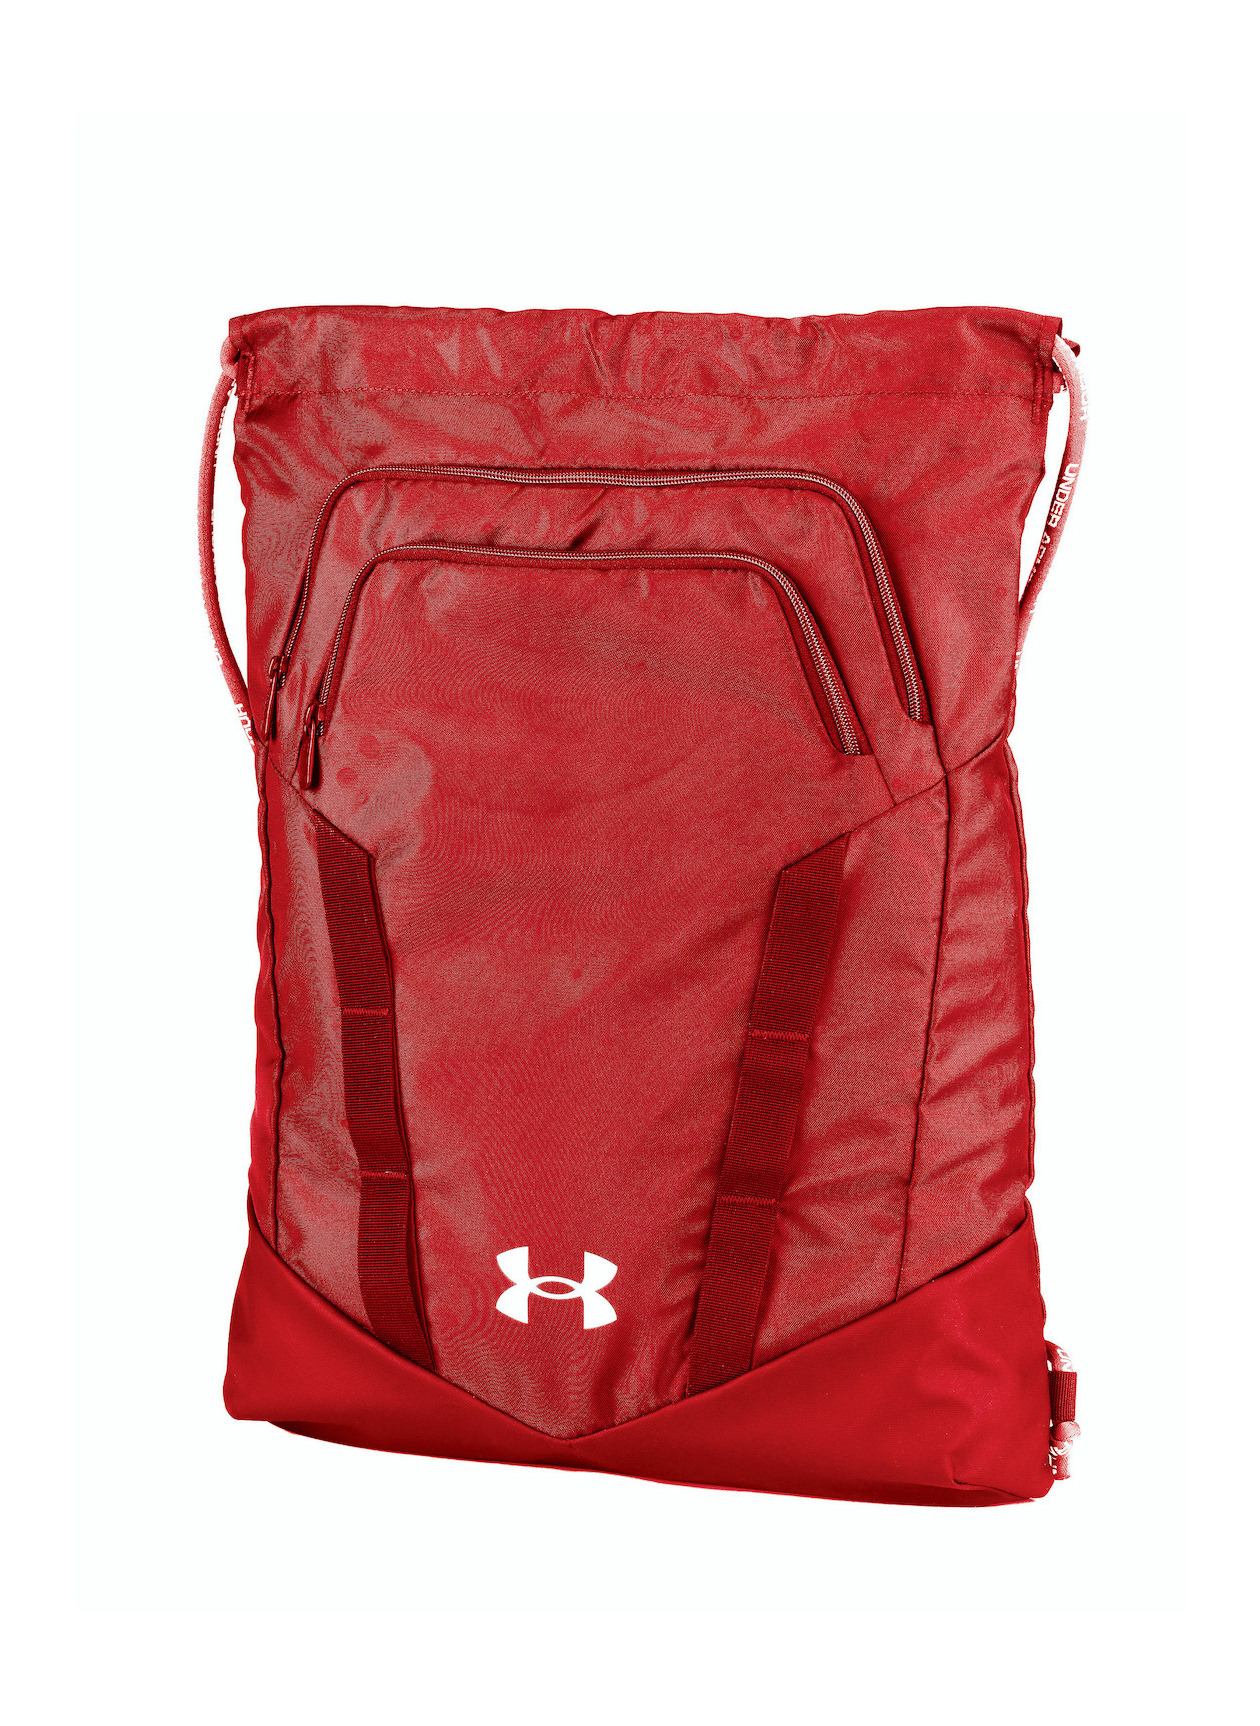 Under Armour Red Undeniable Sackpack 2.0